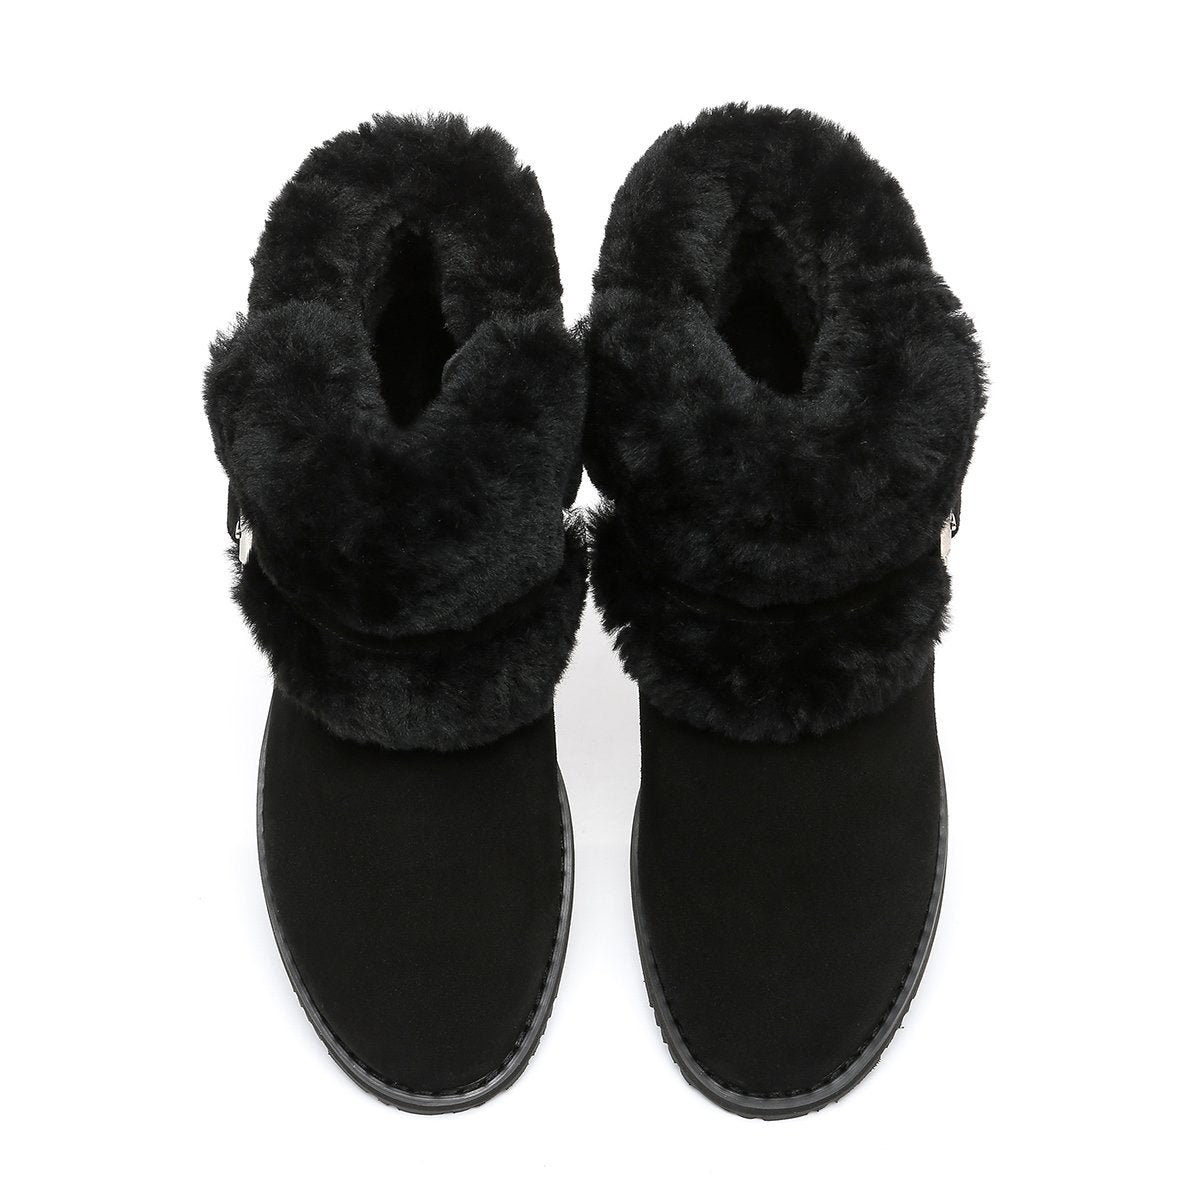 UGG Collette Buckled Strap Fluffy Boots